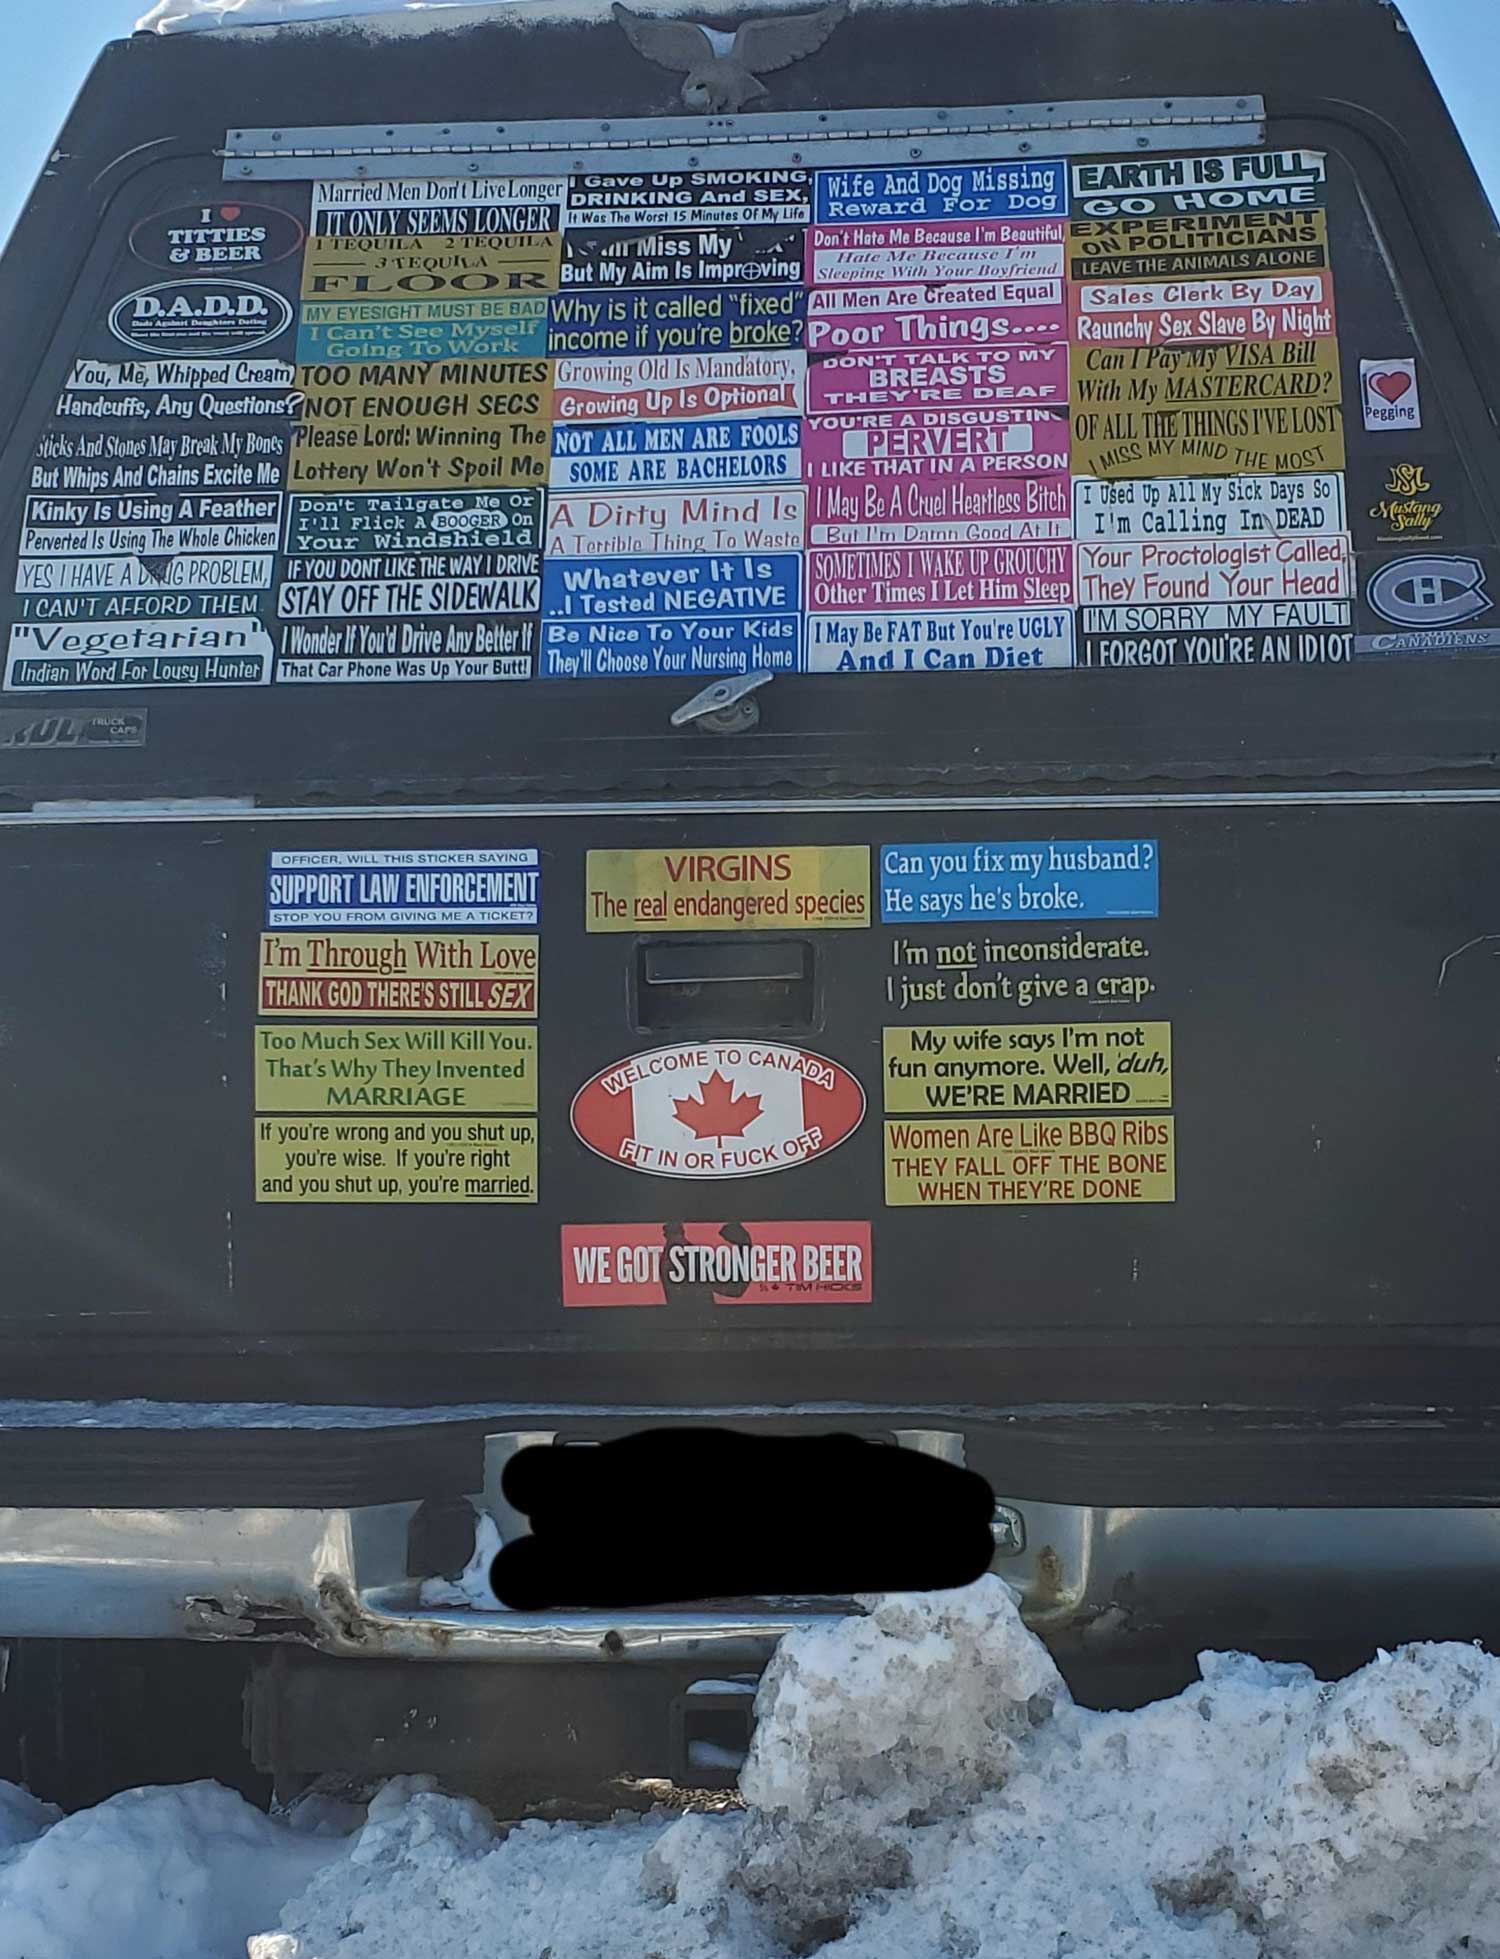 Walked by this truck full of interesting bumper stickers today. There were more on the sides